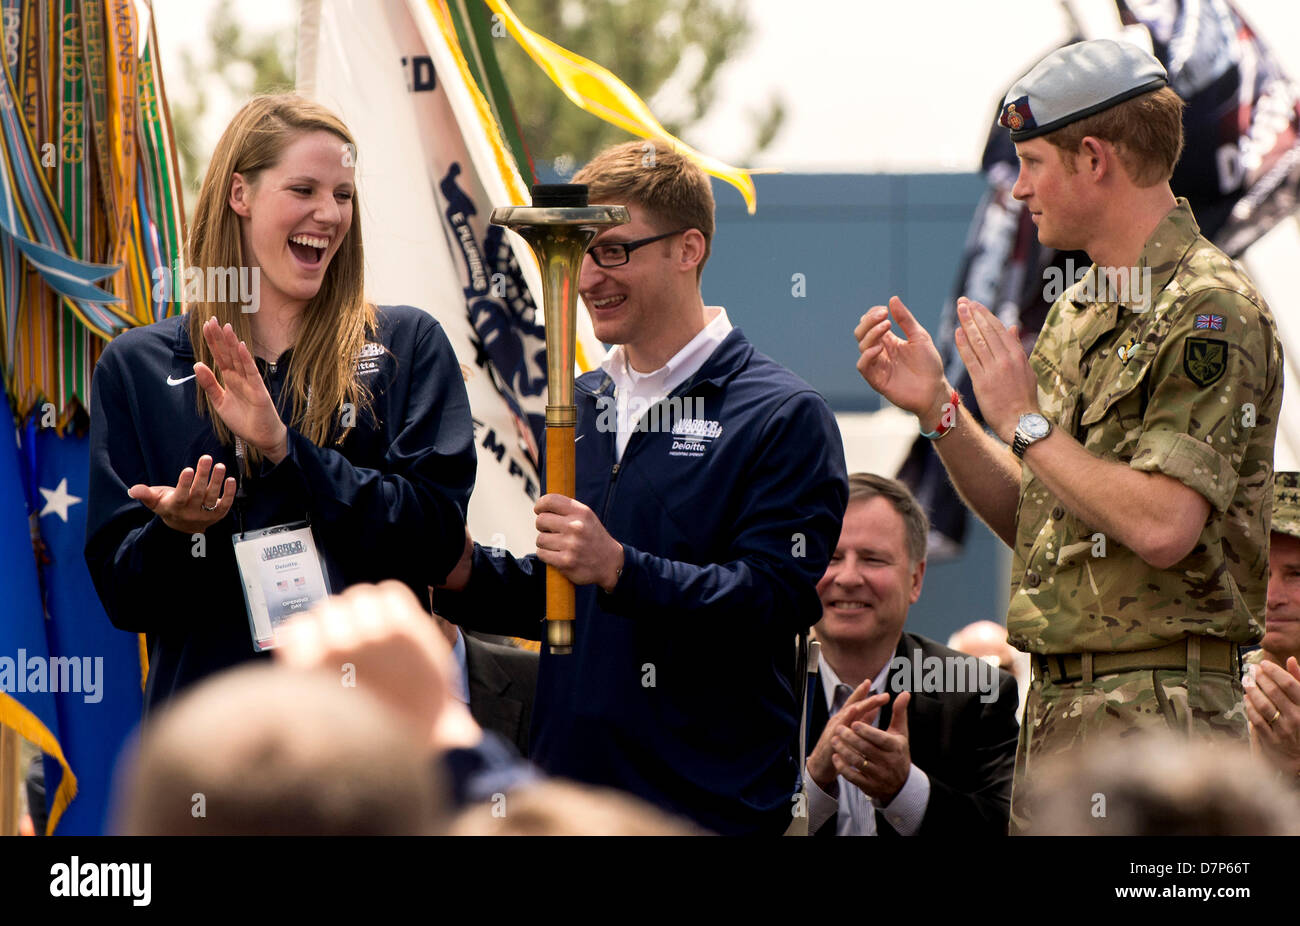 Colorado Springs, Colorado, U.S. - 11th May 2013 -  PRINCE HARRY attends the Opening Ceremonies of the 2013 Warrior Games, a competition for ill and injured service members, with Olympic gold medalist MISSY FRANKLIN L and torch bearer U.S. Navy LT. BRAD SNYDER. A total of 260 service members with amputations, spinal cord injuries, post-traumatic stress disorder and traumatic brain injury are expected to take part in the six days of competition. Credit Image: © Brian Cahn/ZUMAPRESS.com Stock Photo